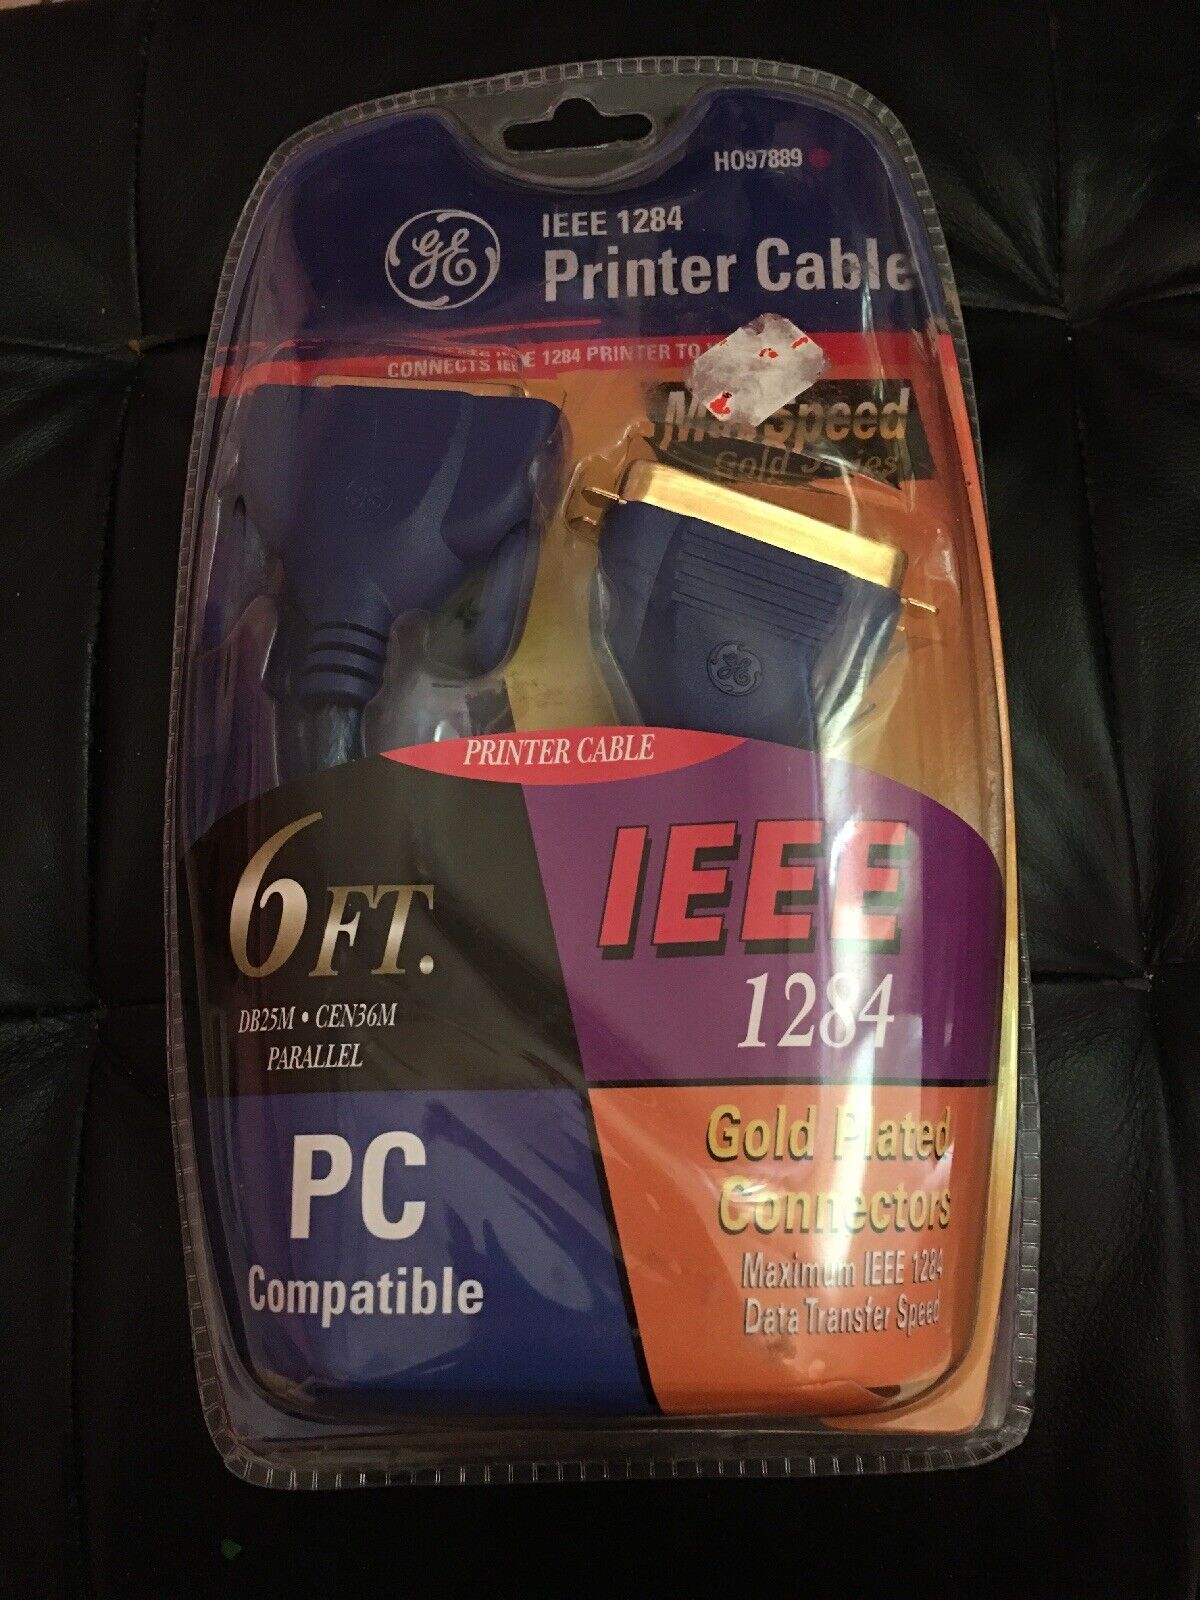 GE IEEE #1284 6ft Gold Plated Connectors Printer Cable PC compatable NIB